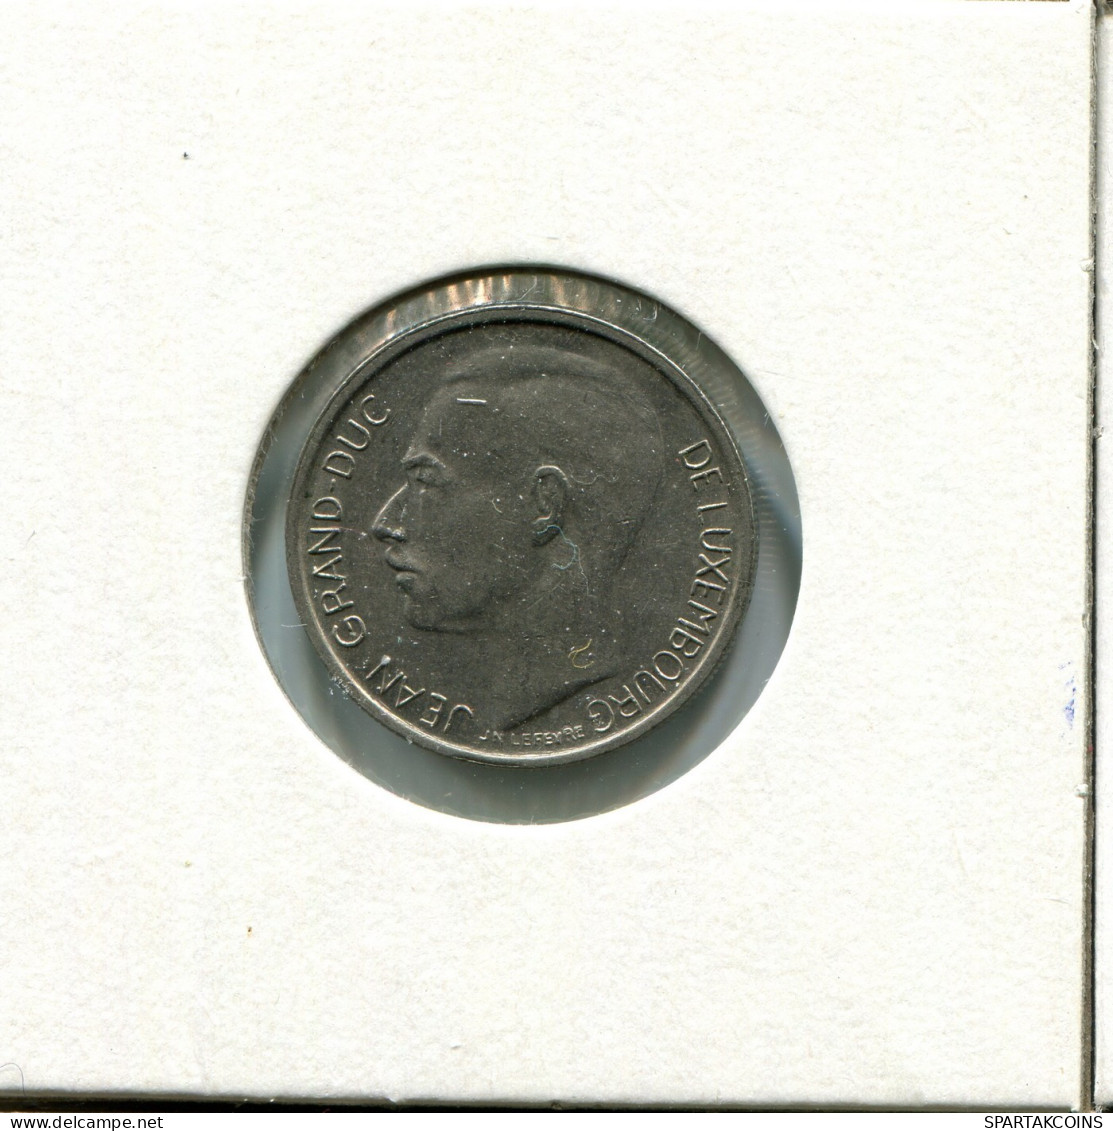 1 FRANC 1971 LUXEMBURG LUXEMBOURG Münze #AW833.D.A - Luxemburg